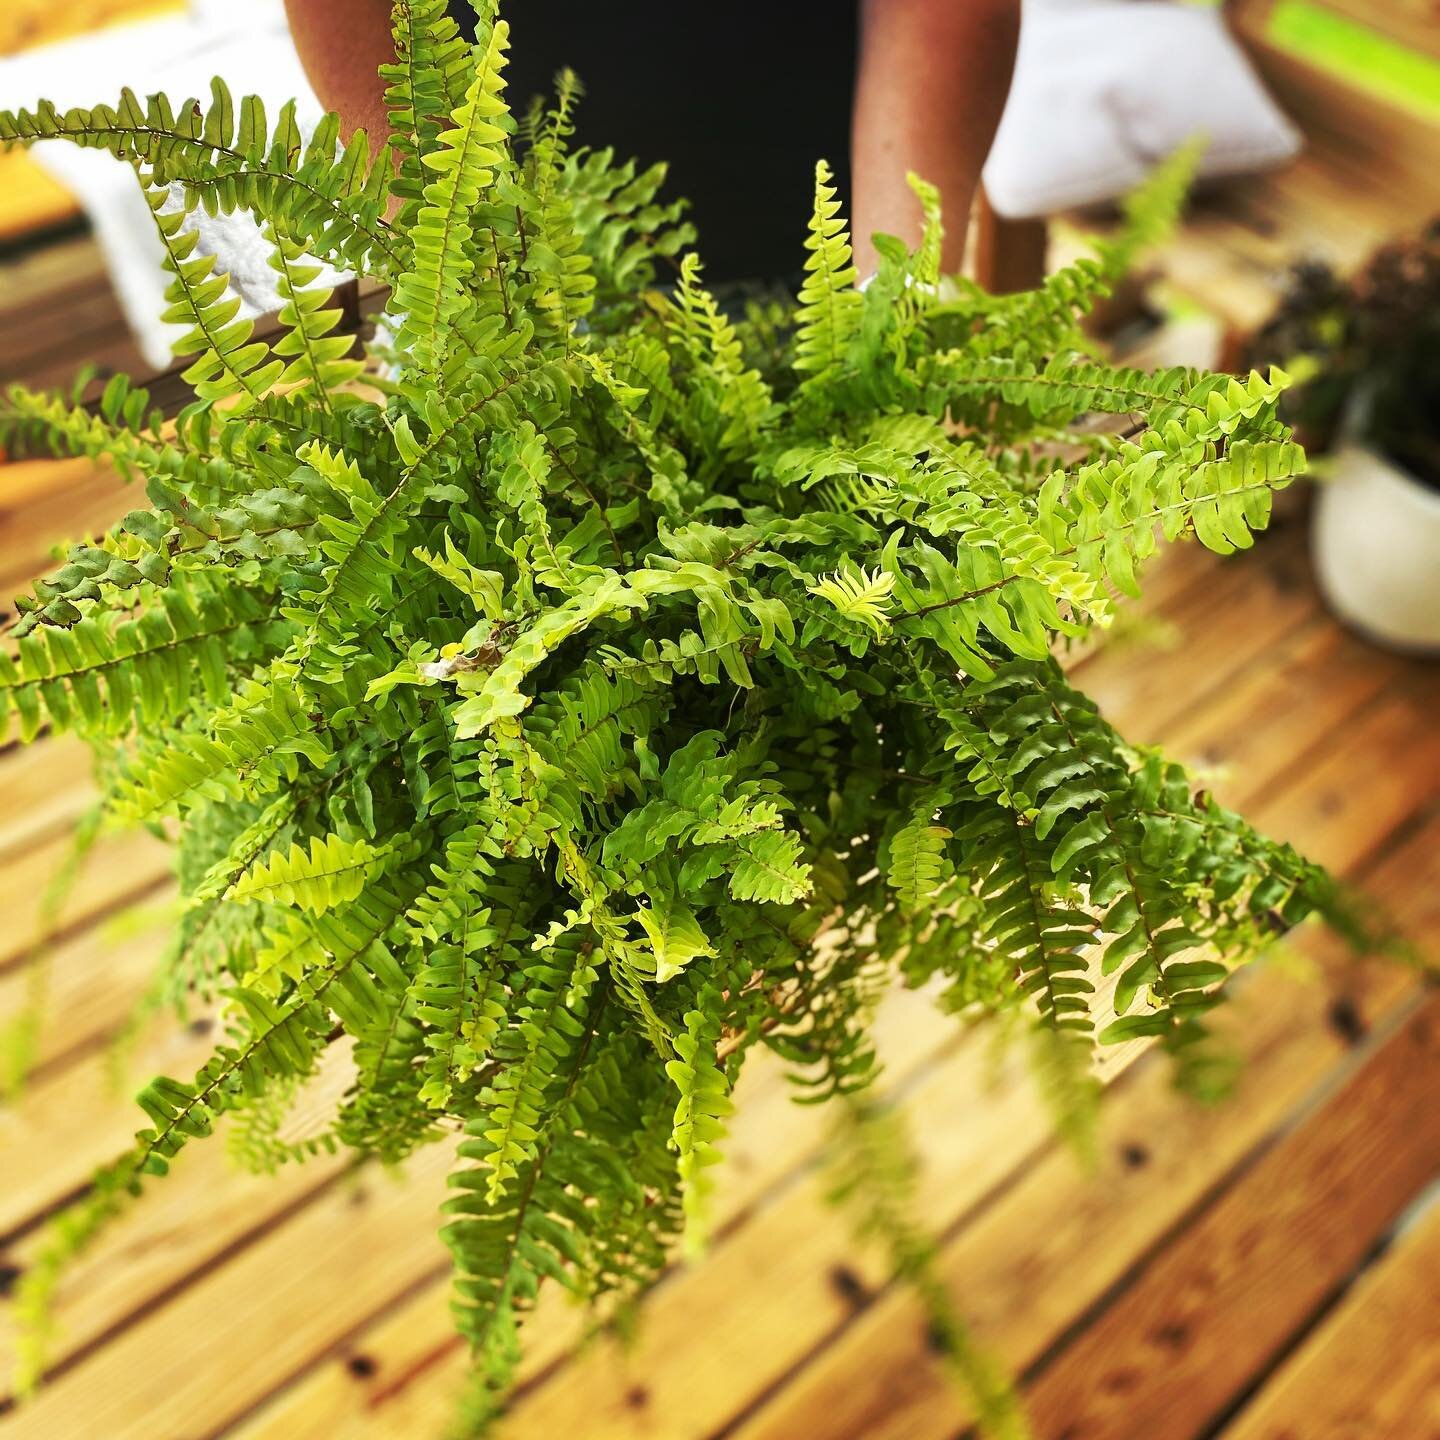 🌿reviving + 🌿revamping this little Instagram space...embracing our pandemic Plan B and doing what I can to bring life, encouragement and engagement to each child&rsquo;s school space - starting with a fern for every desk - you&rsquo;re welcome kids